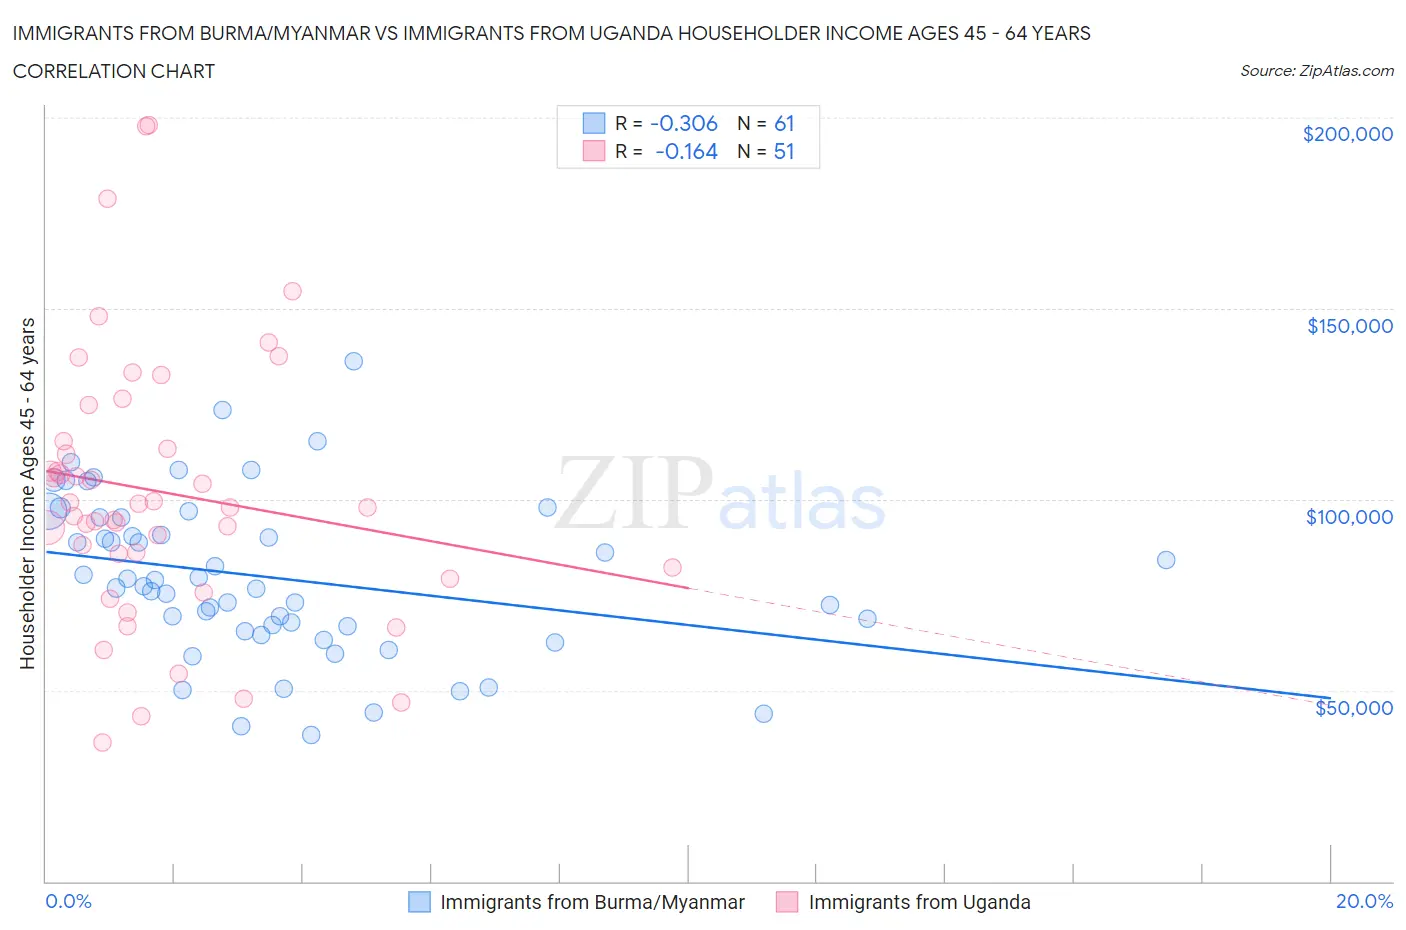 Immigrants from Burma/Myanmar vs Immigrants from Uganda Householder Income Ages 45 - 64 years